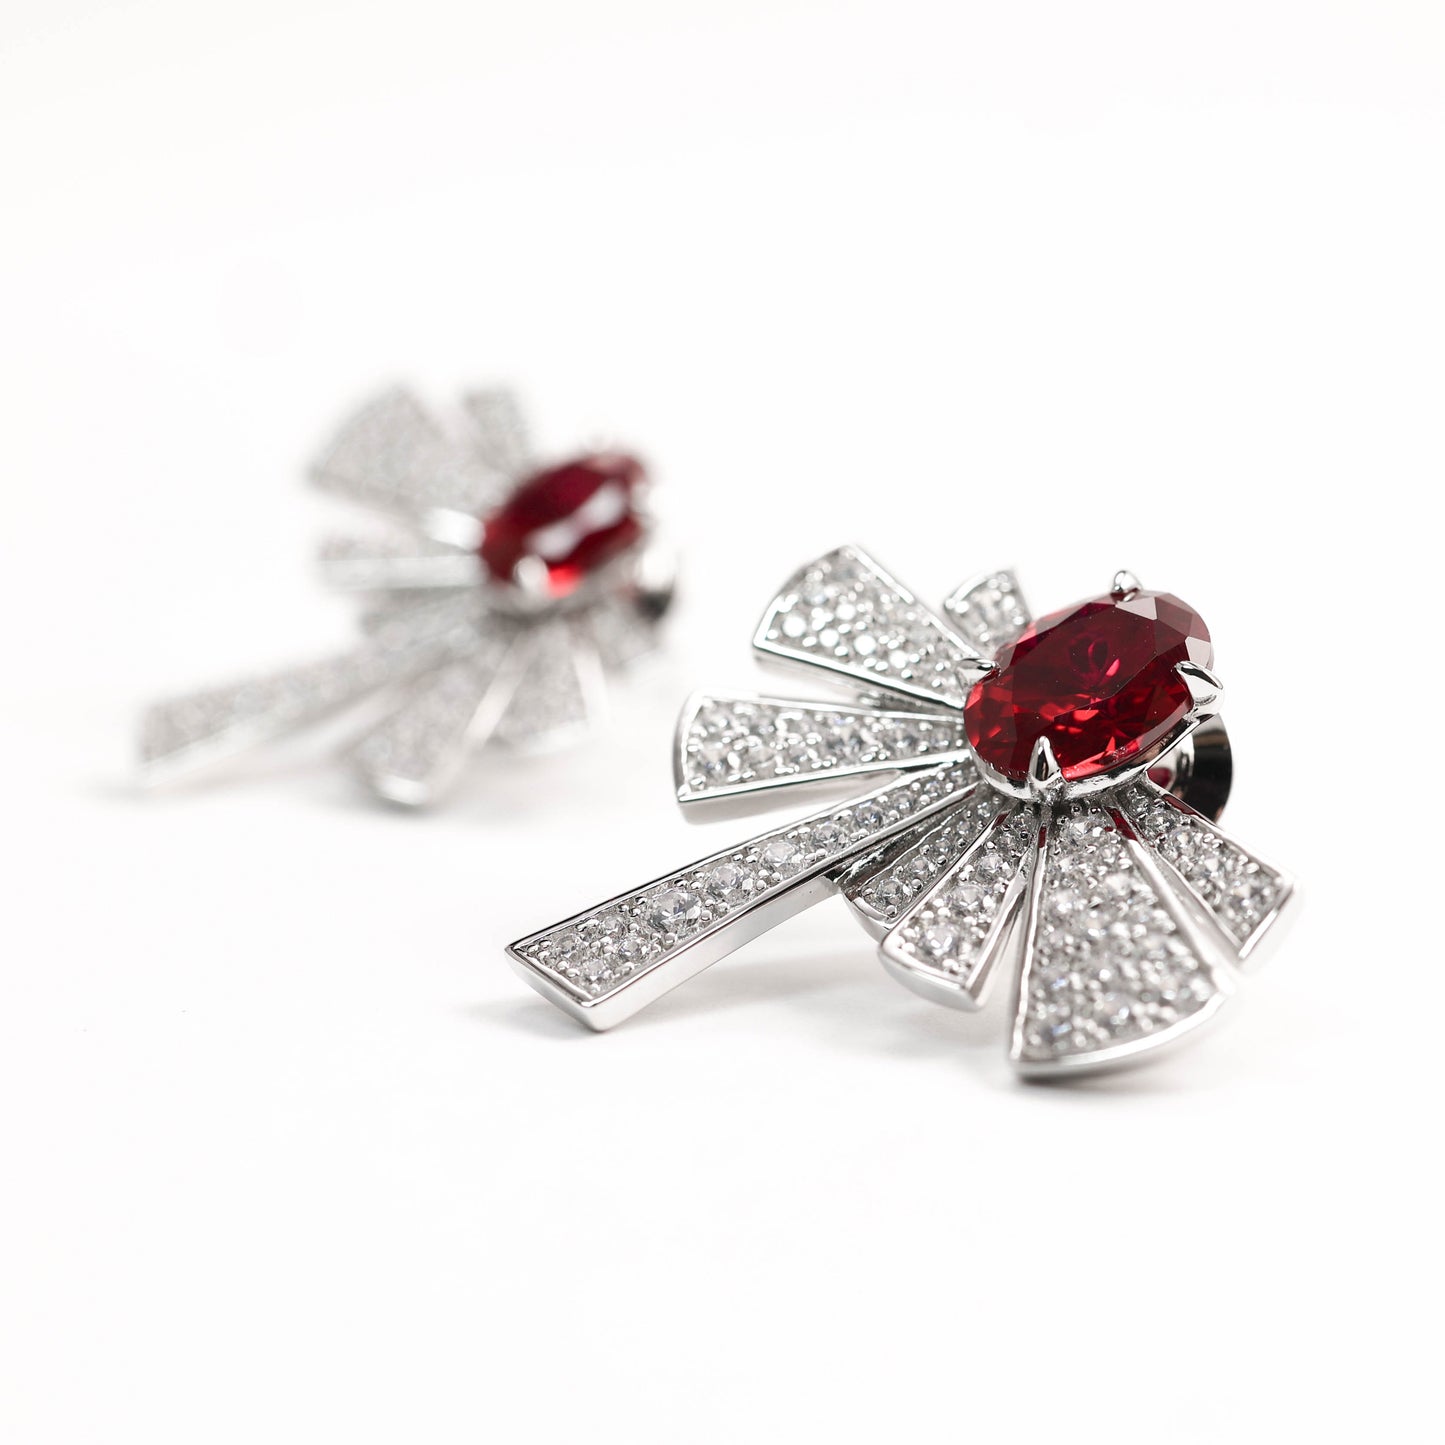 Micro-setting Ruby color Lab created stones proud as a peacock earrings, sterling silver